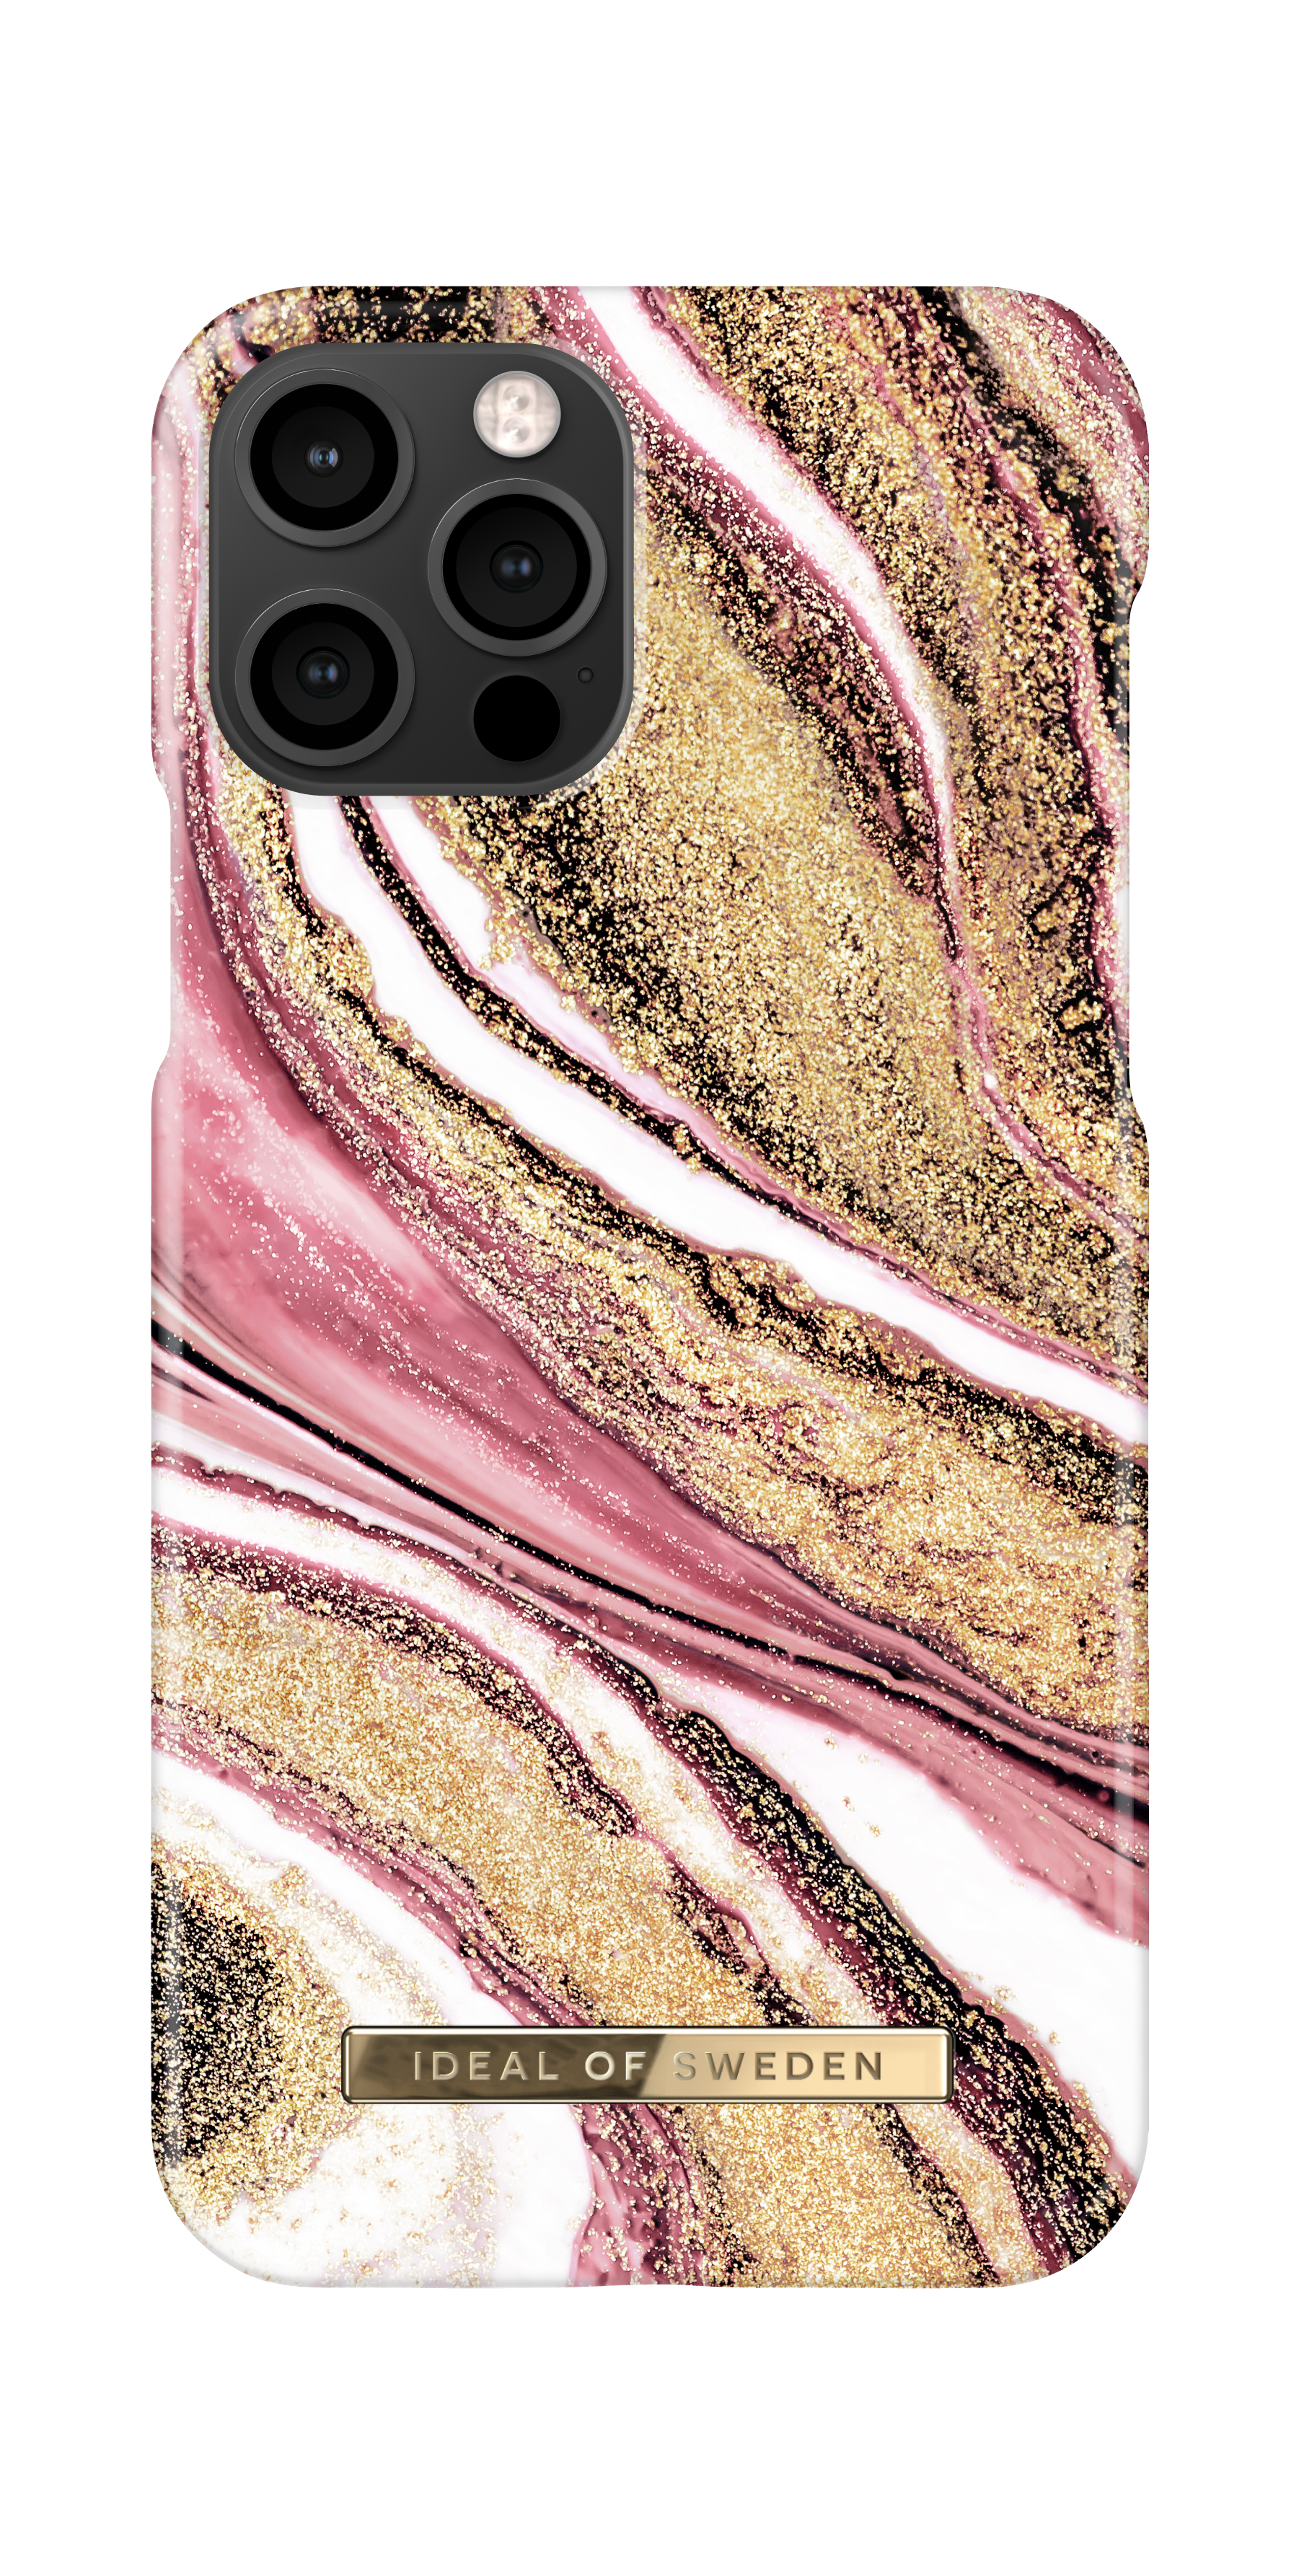 Cosmic SWEDEN IDEAL iPhone Backcover, 12 12, Swirl iPhone IDFCSS20-I2061-193, OF Pink Pro, Apple,